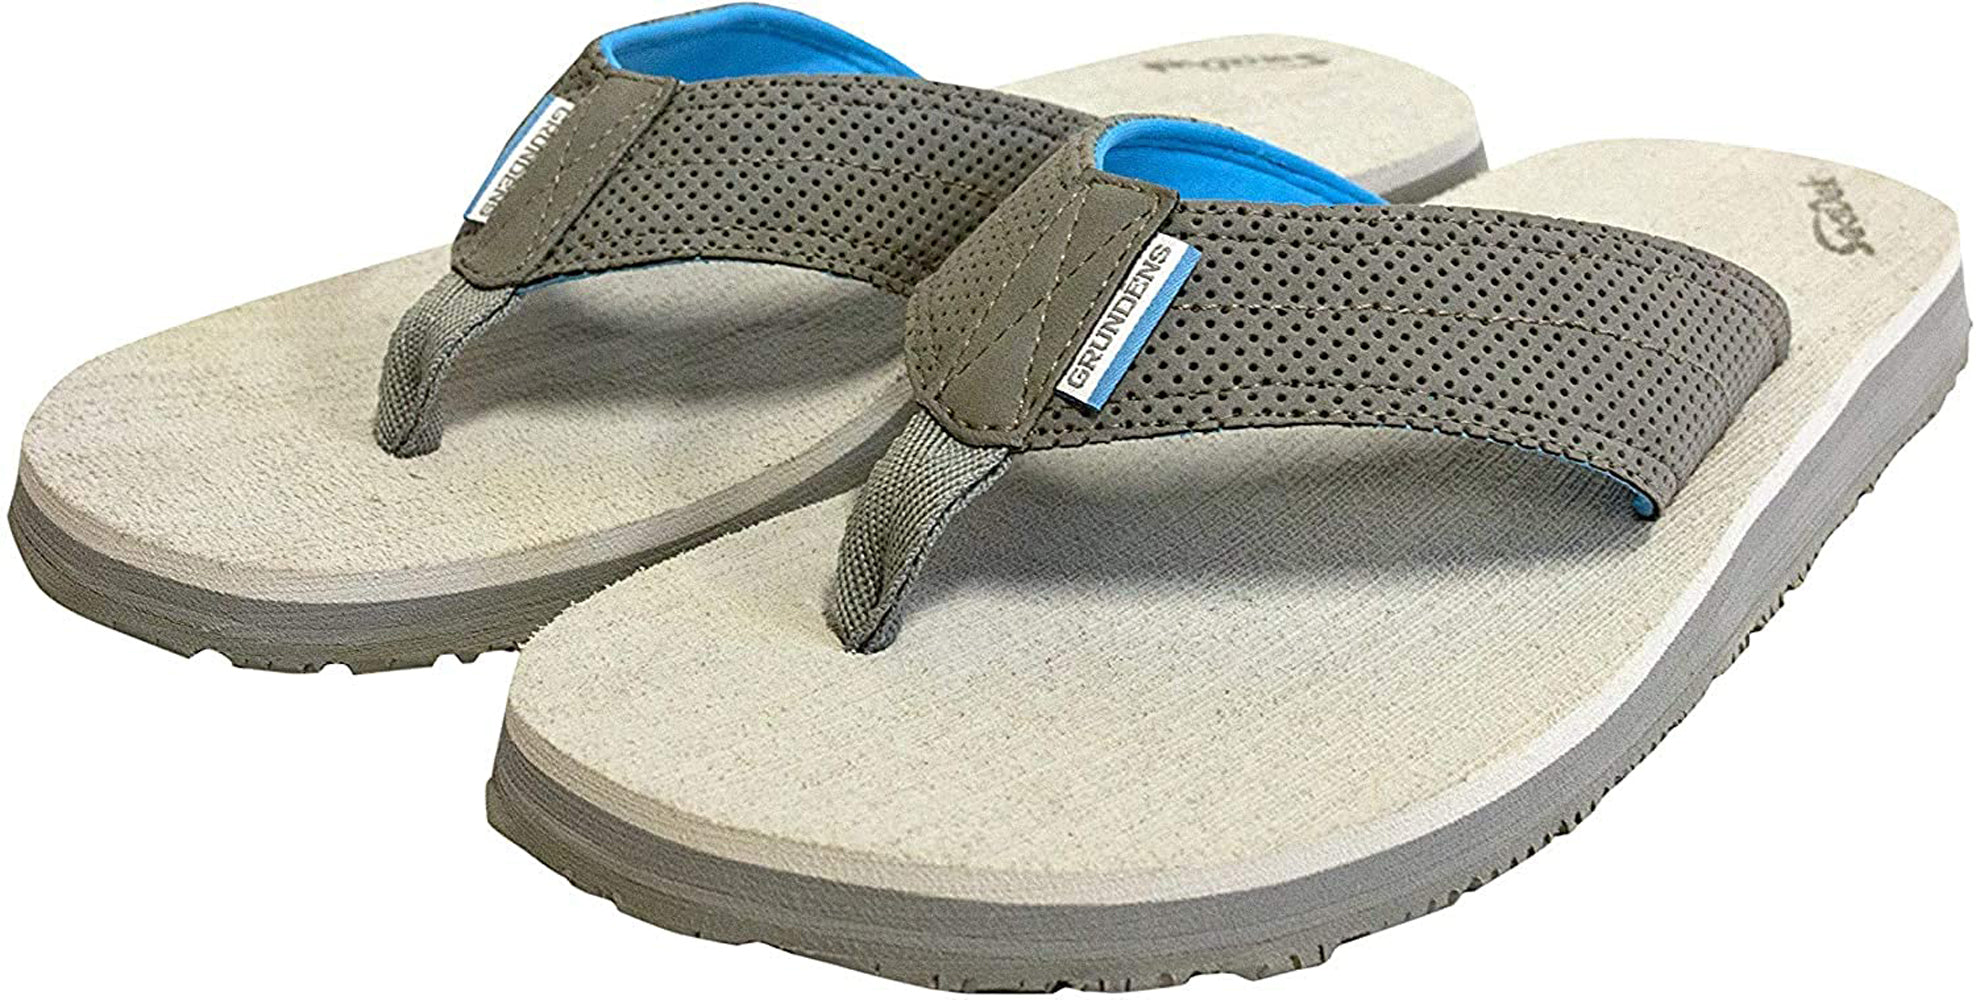 Deck Hand Sandal in Glacier Grey color from the side view